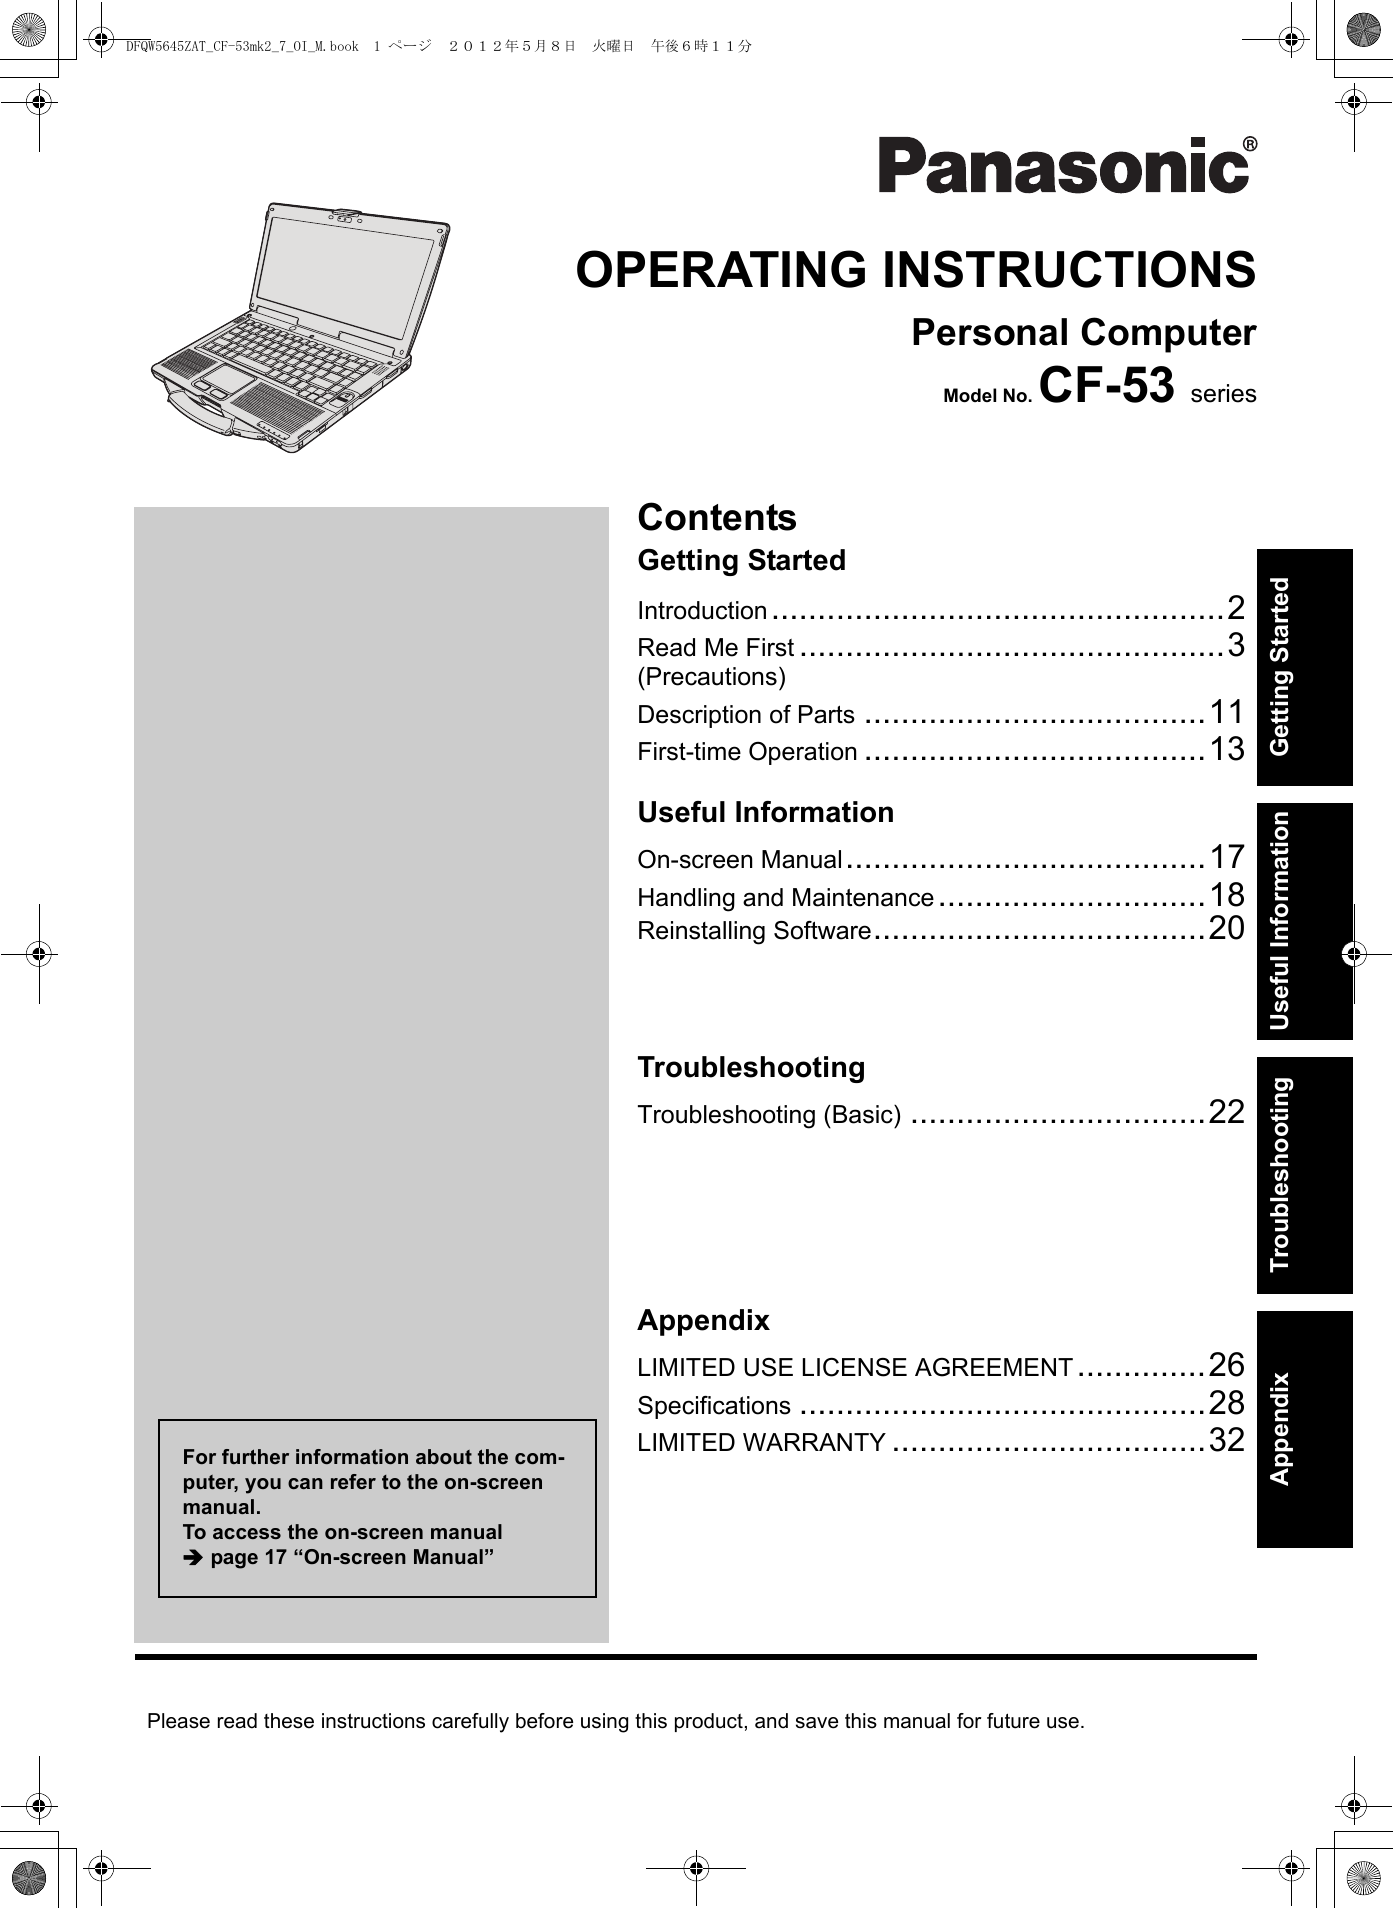 Please read these instructions carefully before using this product, and save this manual for future use.ContentsGetting StartedUseful InformationGetting StartedUseful InformationTroubleshootingAppendixAppendixTroubleshootingOPERATING INSTRUCTIONSPersonal ComputerModel No. CF-53 seriesIntroduction.................................................2Read Me First ..............................................3(Precautions)Description of Parts .....................................11First-time Operation .....................................13On-screen Manual.......................................17Handling and Maintenance.............................18Reinstalling Software....................................20Troubleshooting (Basic) ................................22LIMITED USE LICENSE AGREEMENT..............26Specifications ............................................28LIMITED WARRANTY ..................................32For further information about the com-puter, you can refer to the on-screen manual.To access the on-screen manual Îpage 17 “On-screen Manual”DFQW5645ZAT_CF-53mk2_7_OI_M.book  1 ページ  ２０１２年５月８日　火曜日　午後６時１１分